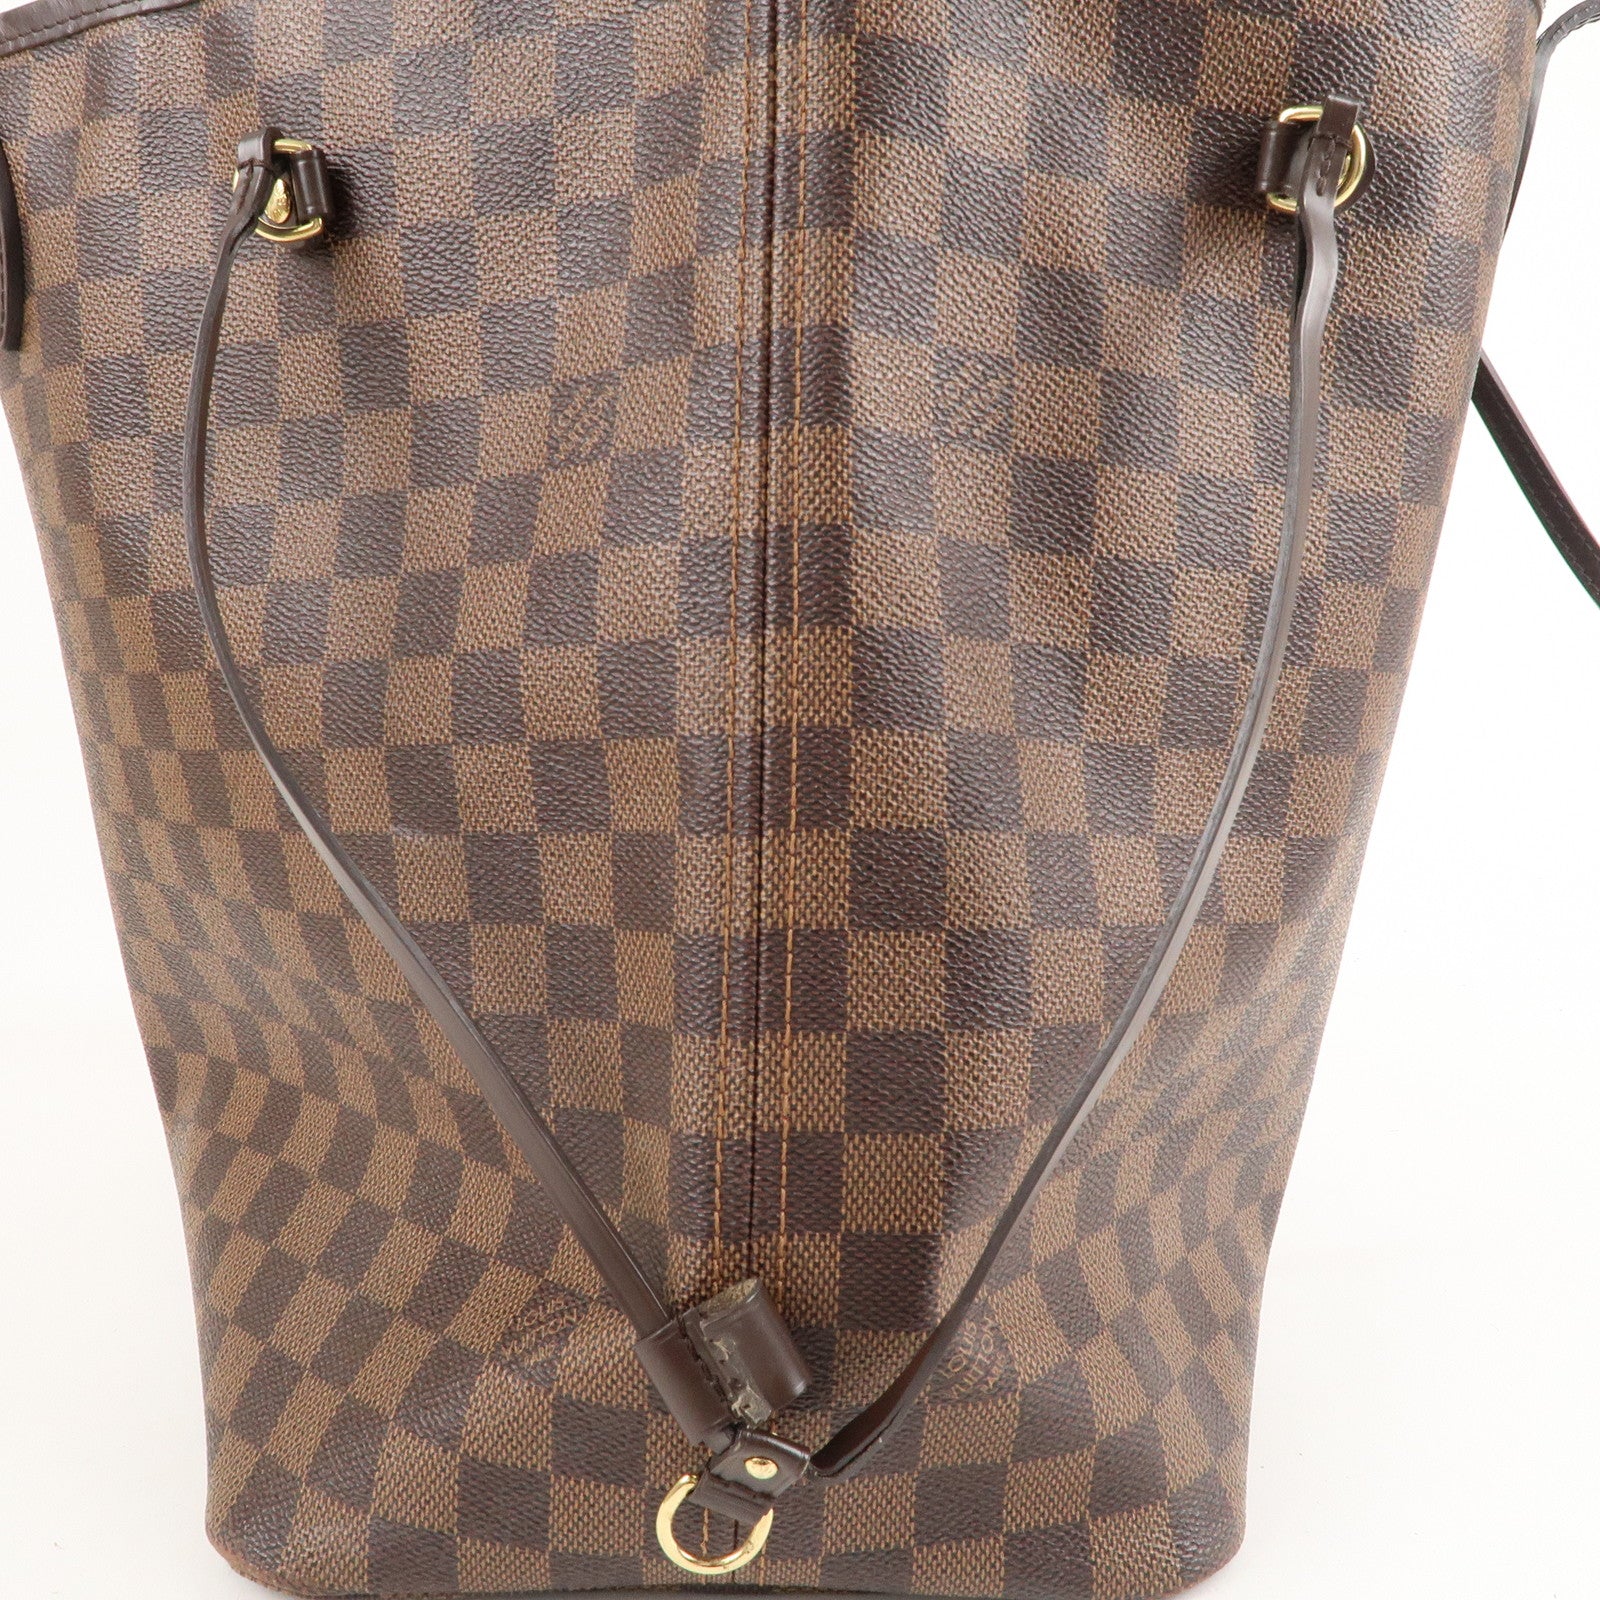 authentic louis-vuitton neverfull mm